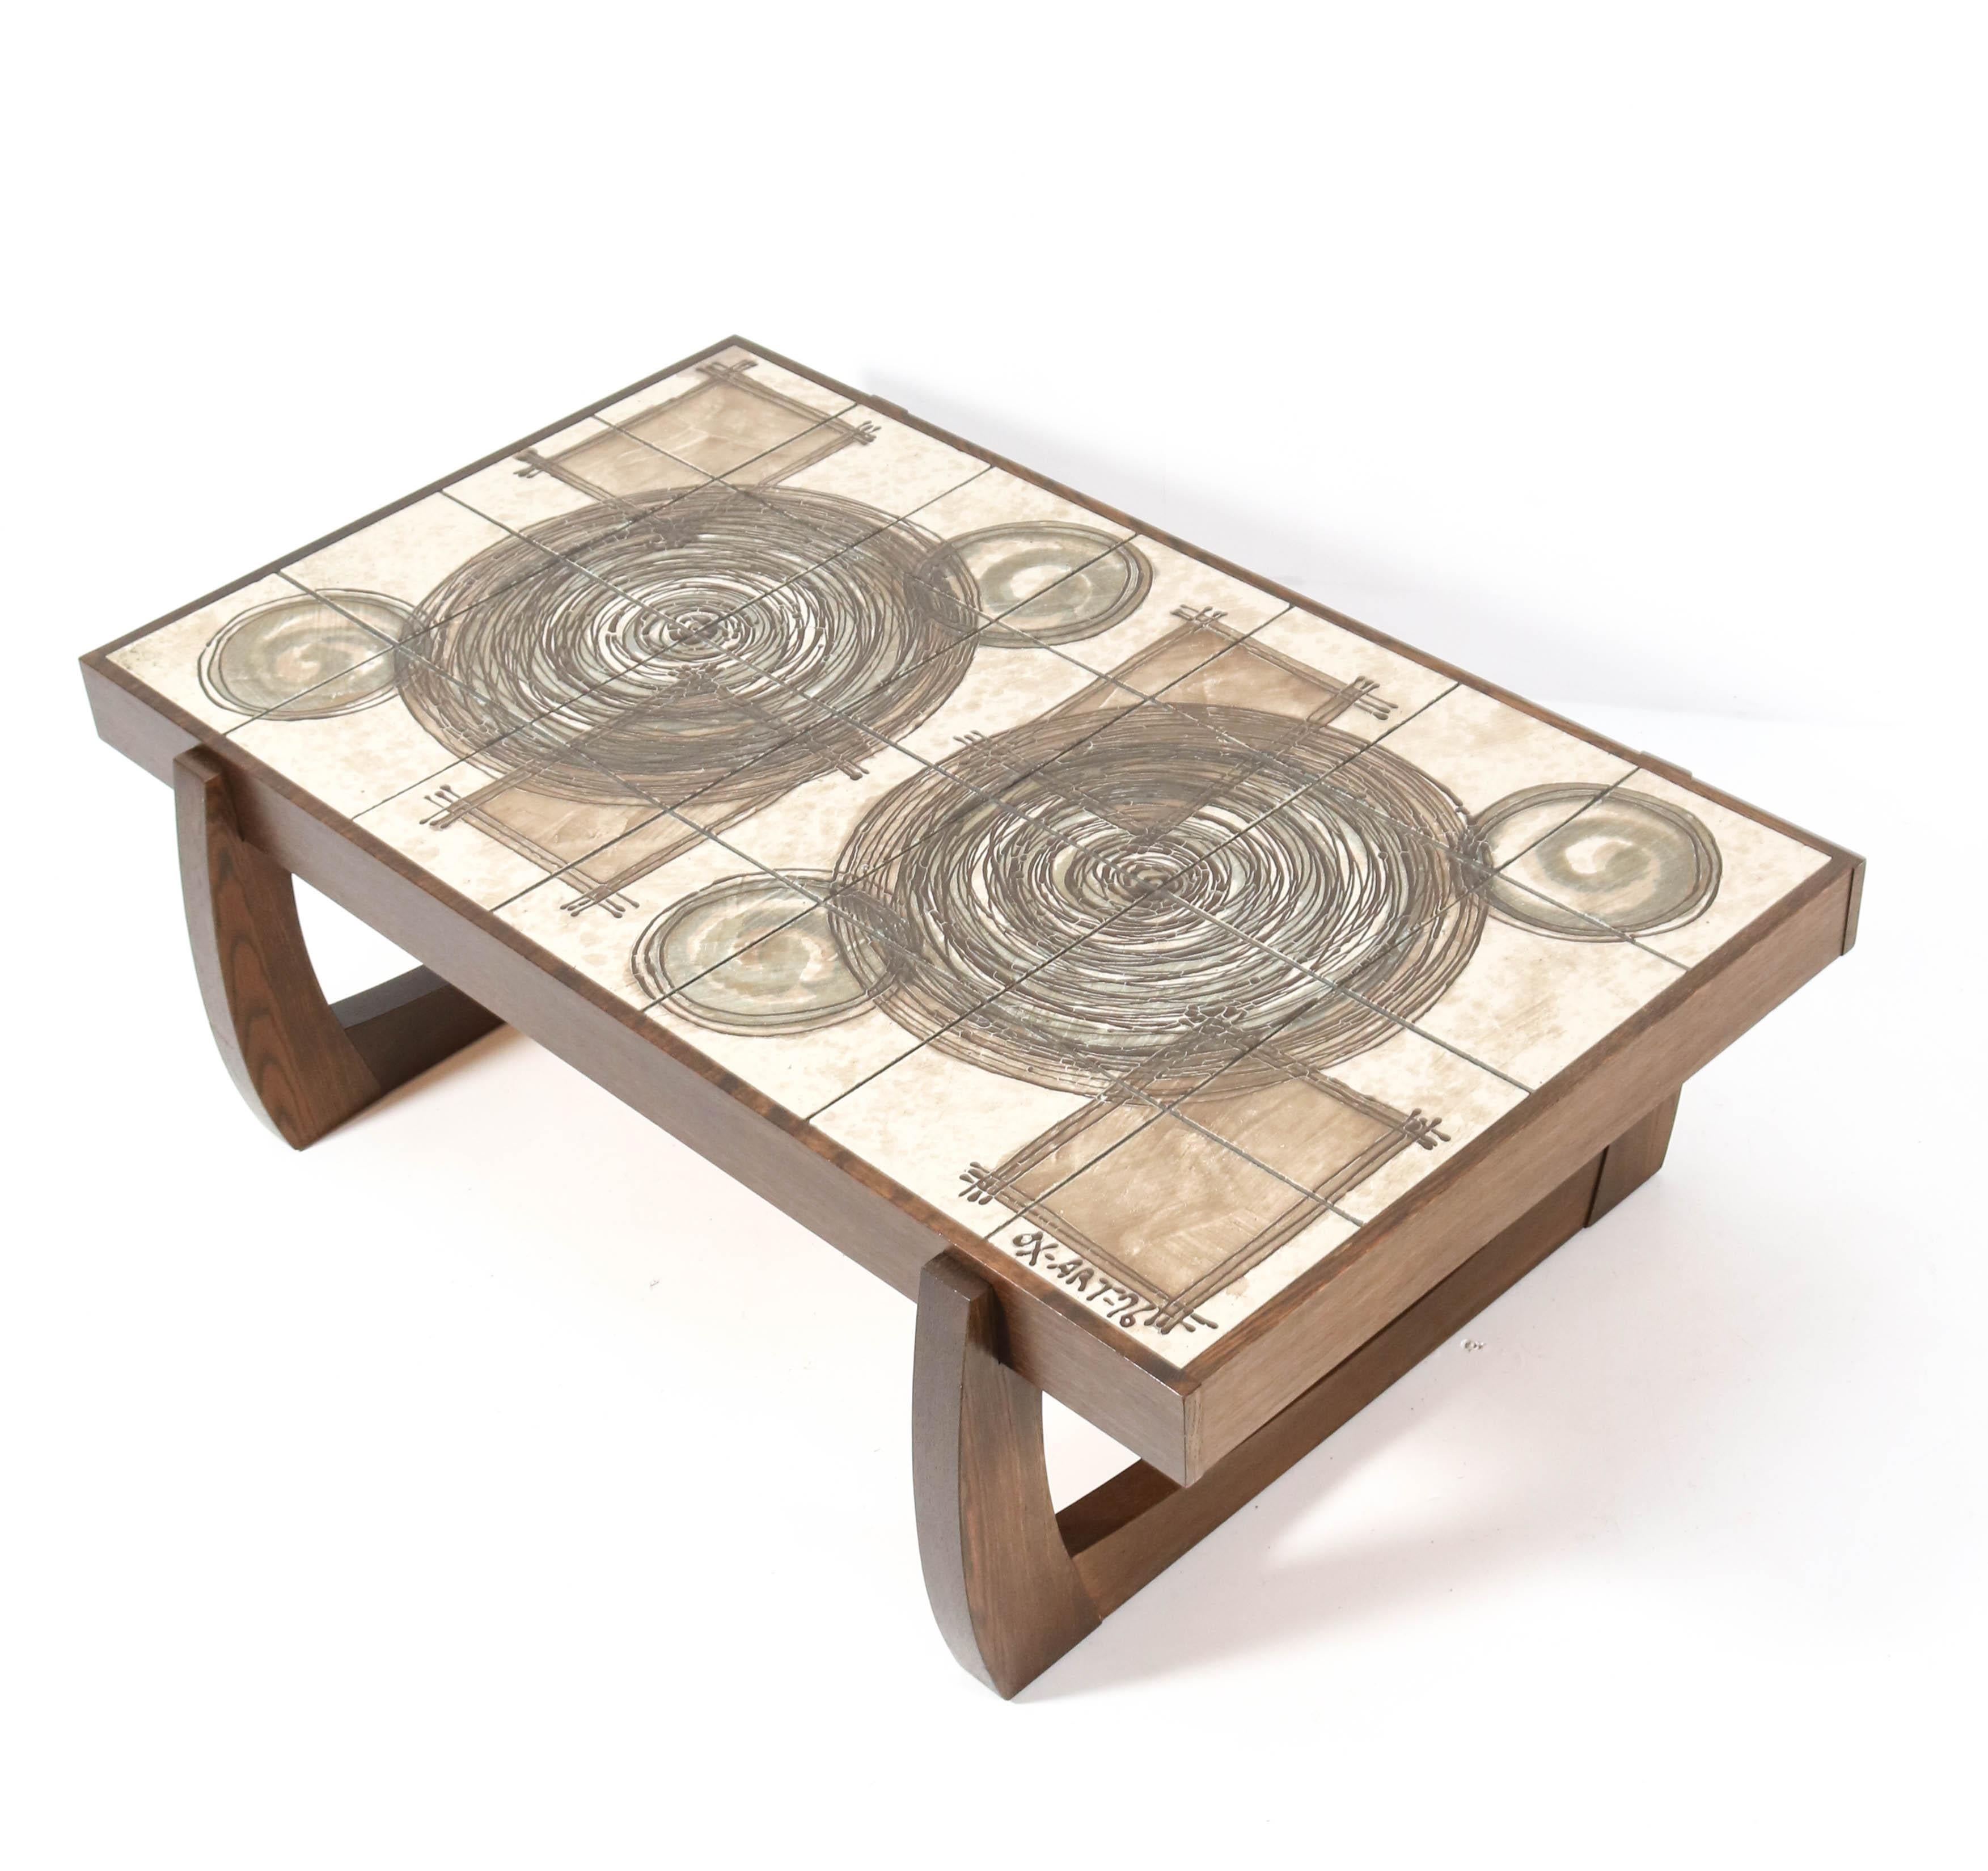 Danish Wenge Brutalist Coffee Table with Tiles by OX Art for Trioh, 1976